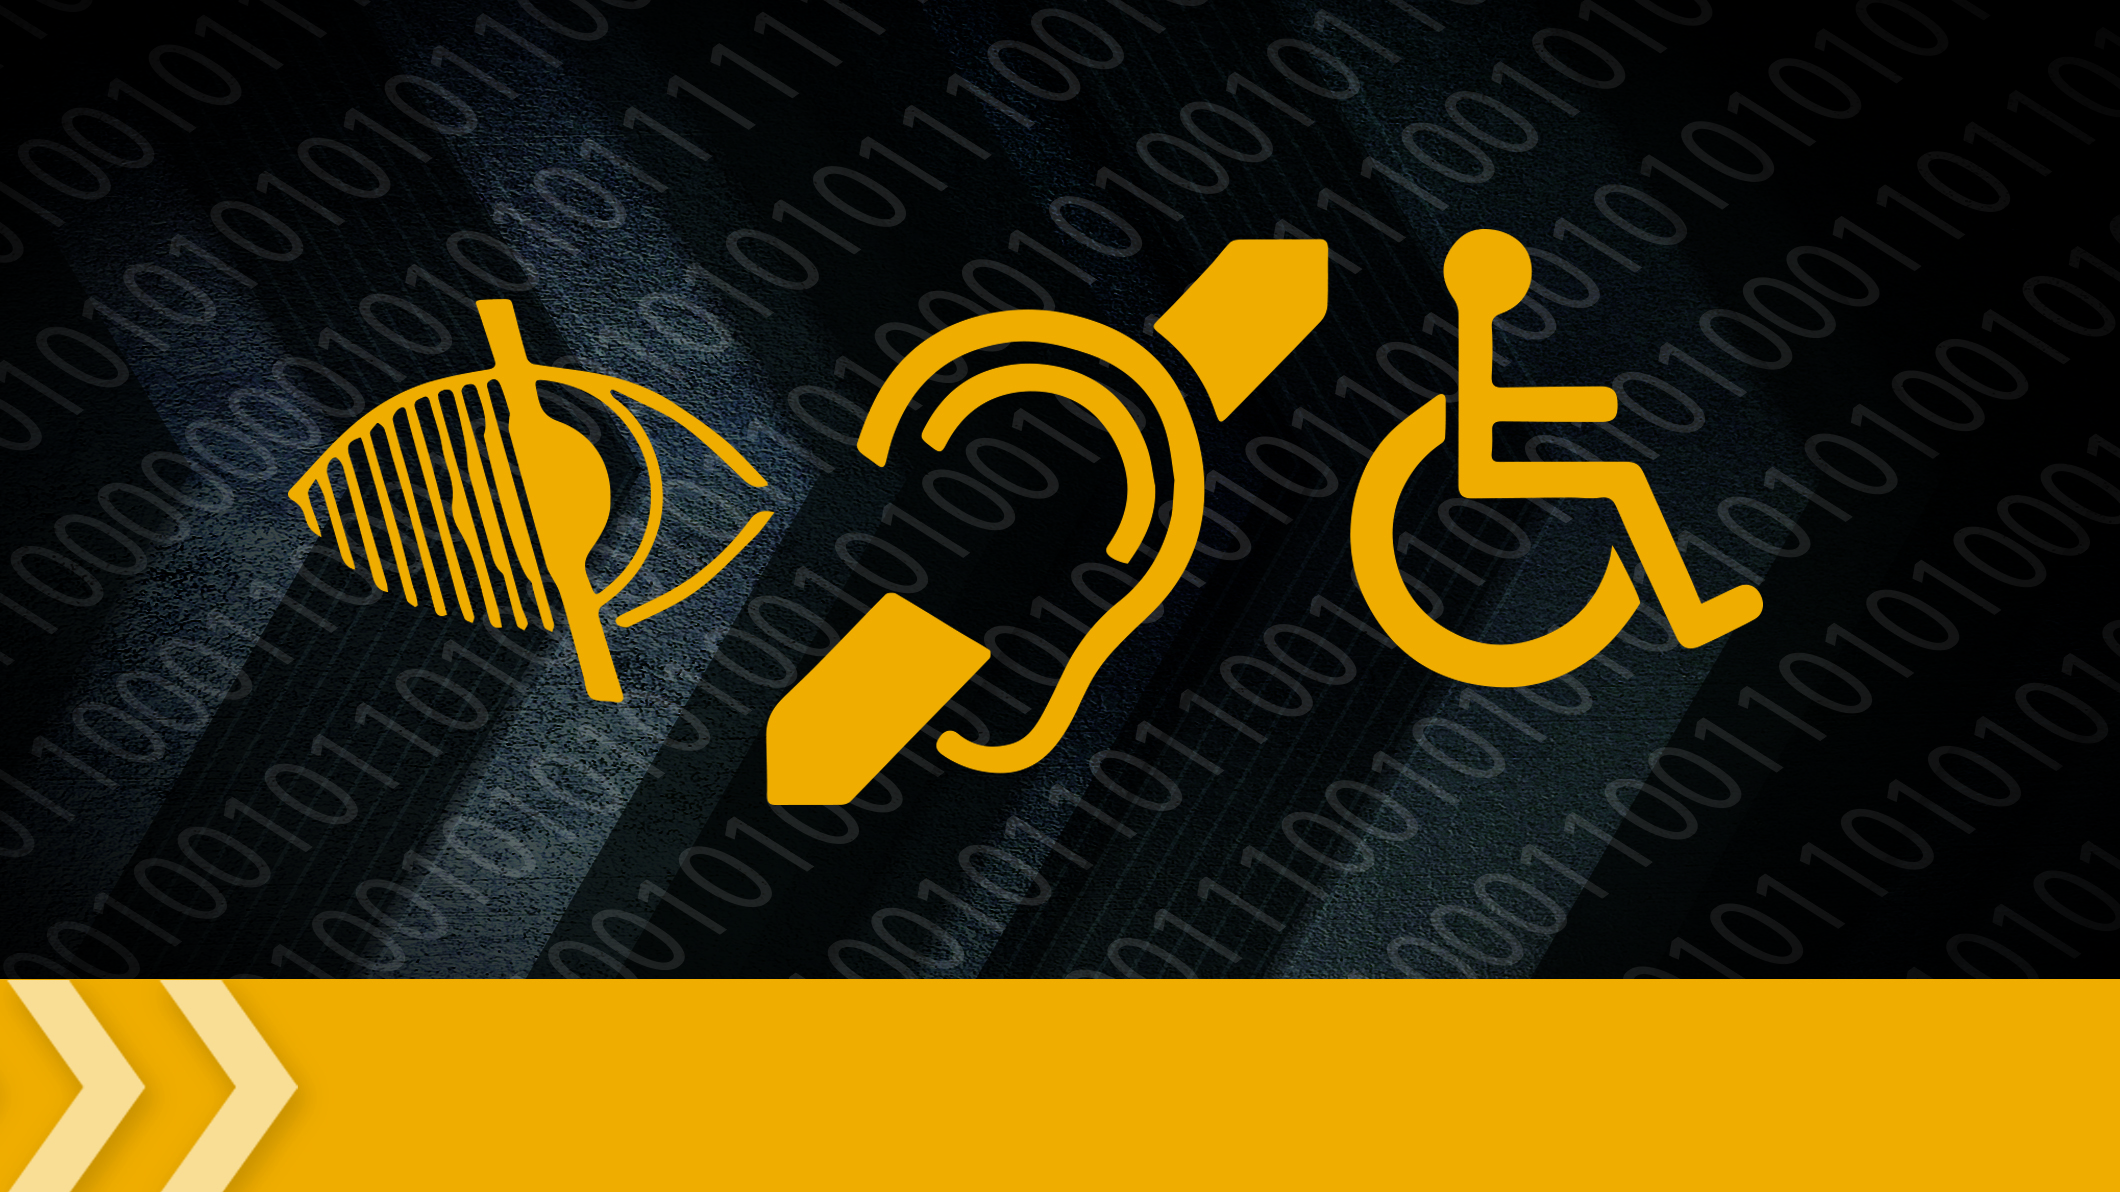 The first Georgia Tech class, Information and Communication Technology (ICT) Accessibility, will address the importance of developing an inclusive workplace for employees and customers with disabilities.